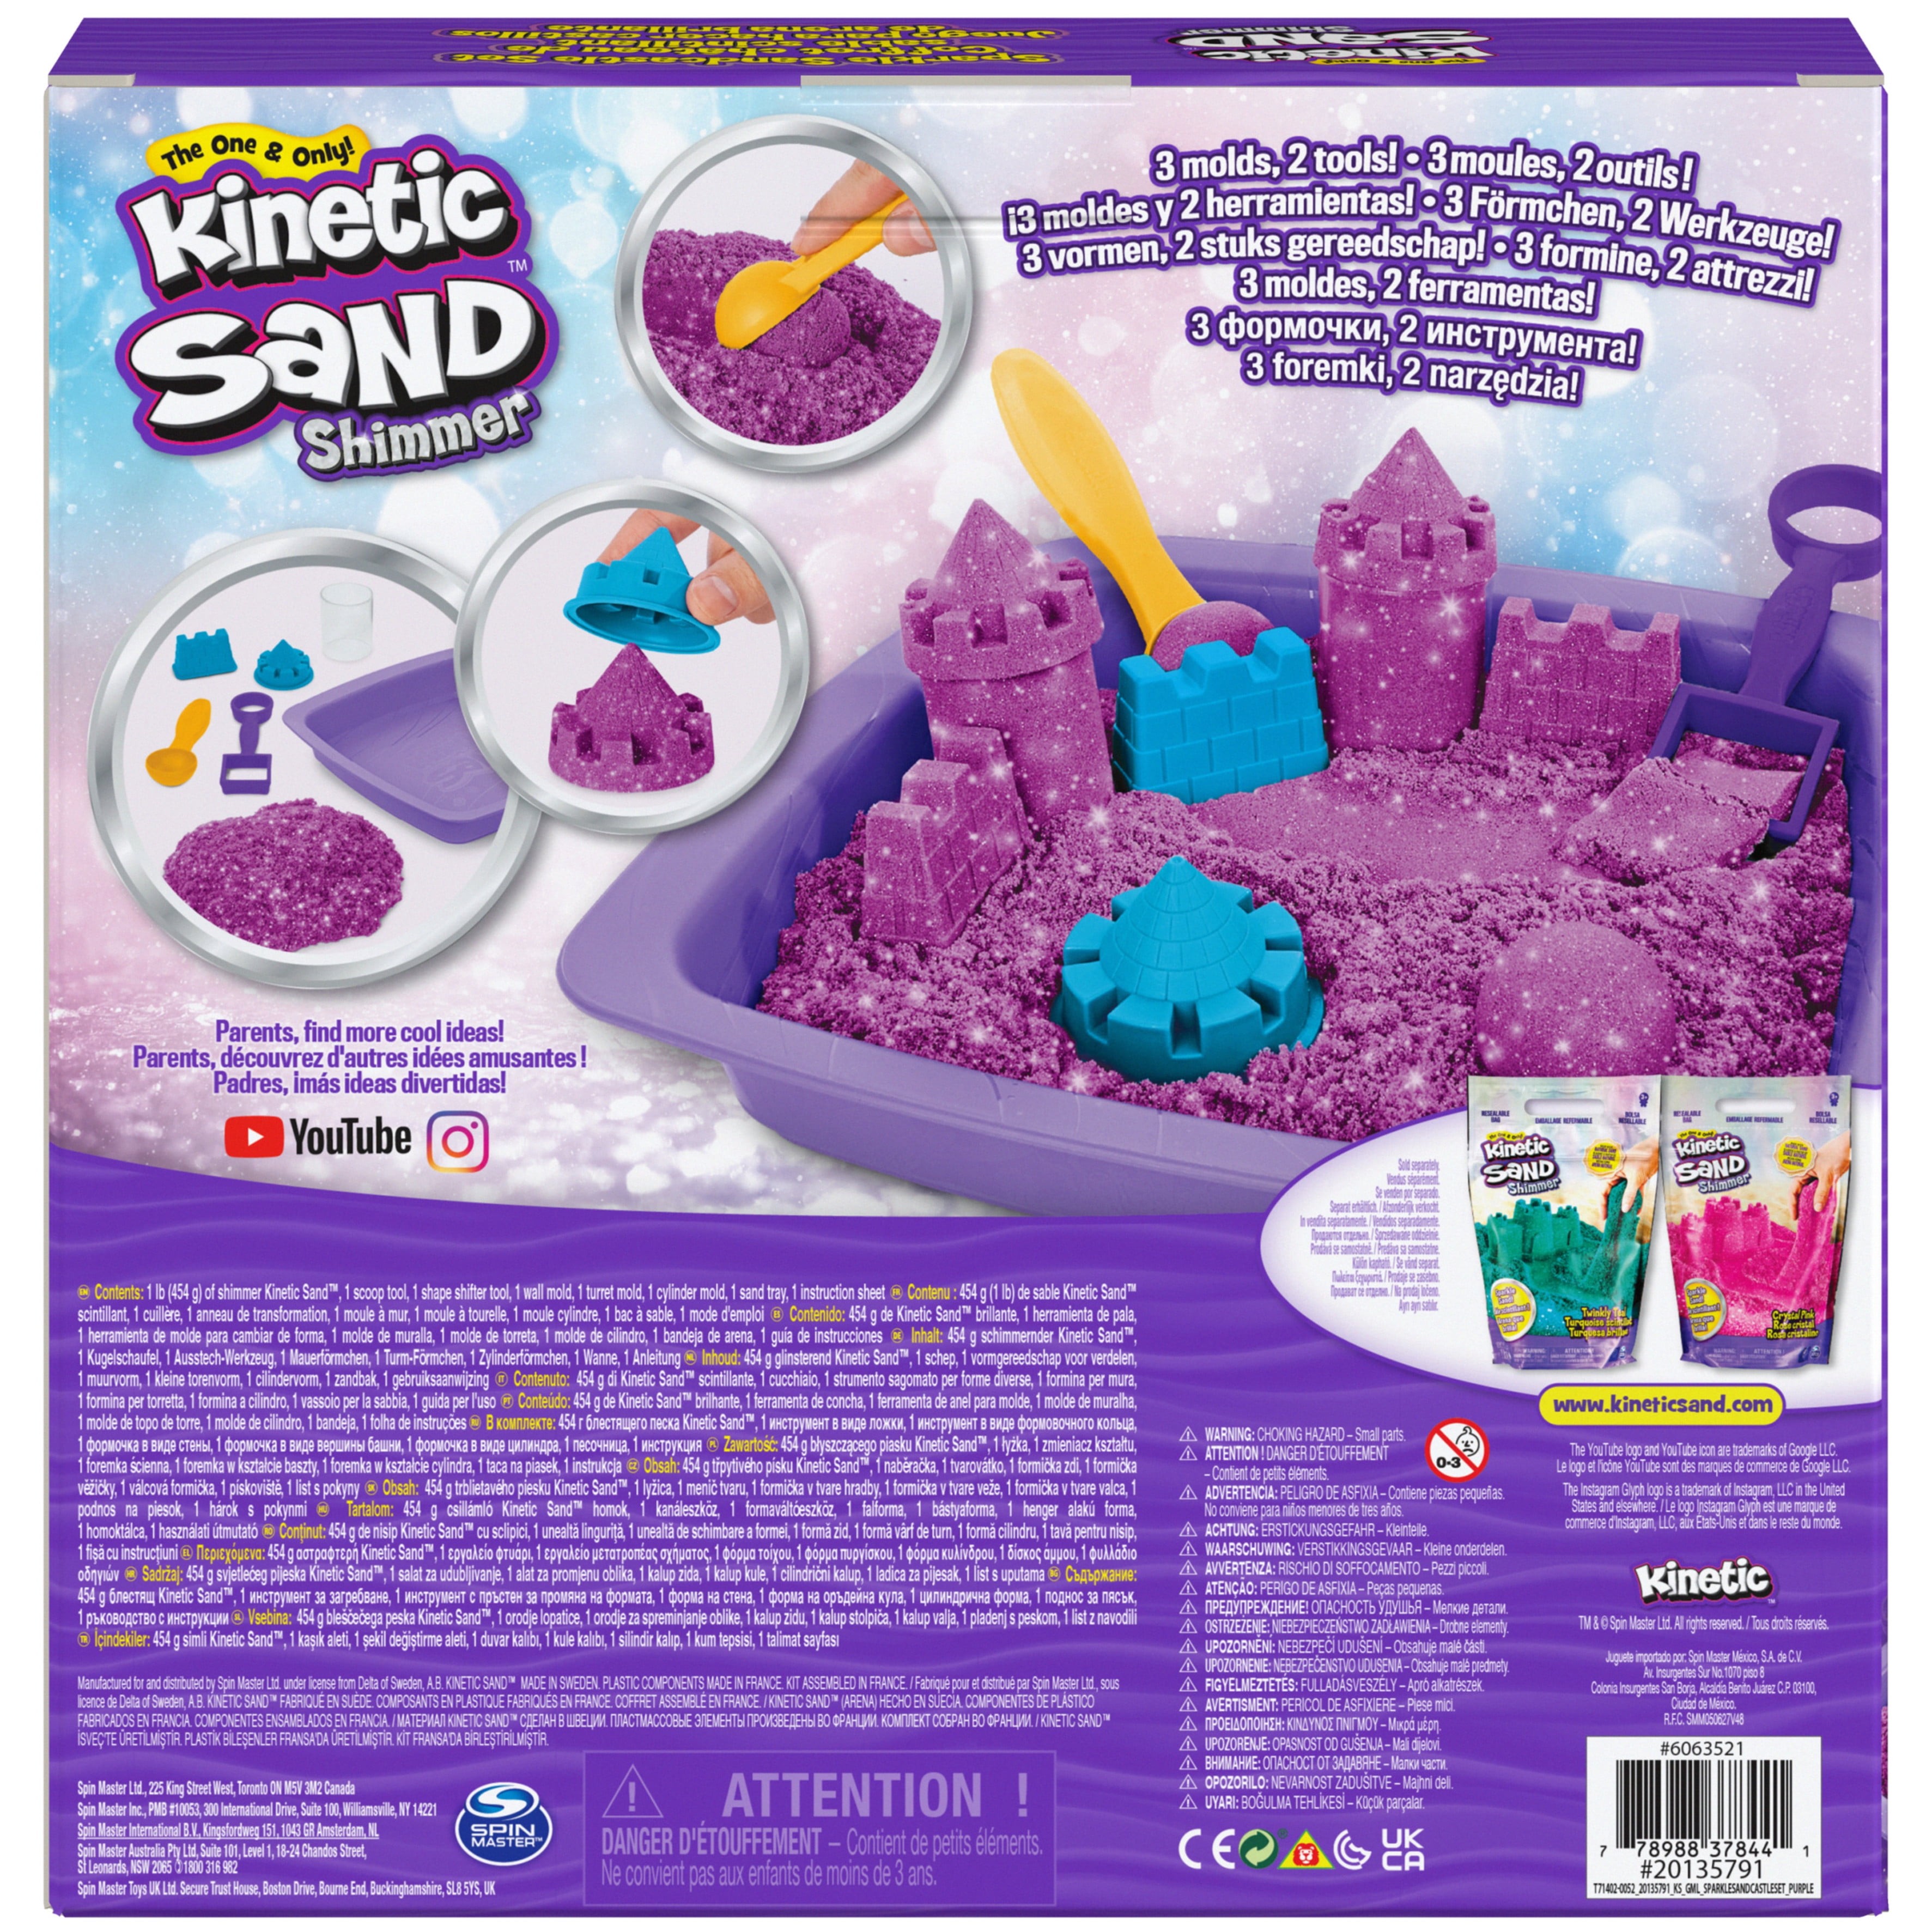 LOT OF 6 CREATOLOGY SPARKLE KINETIC SAND *NEW* 